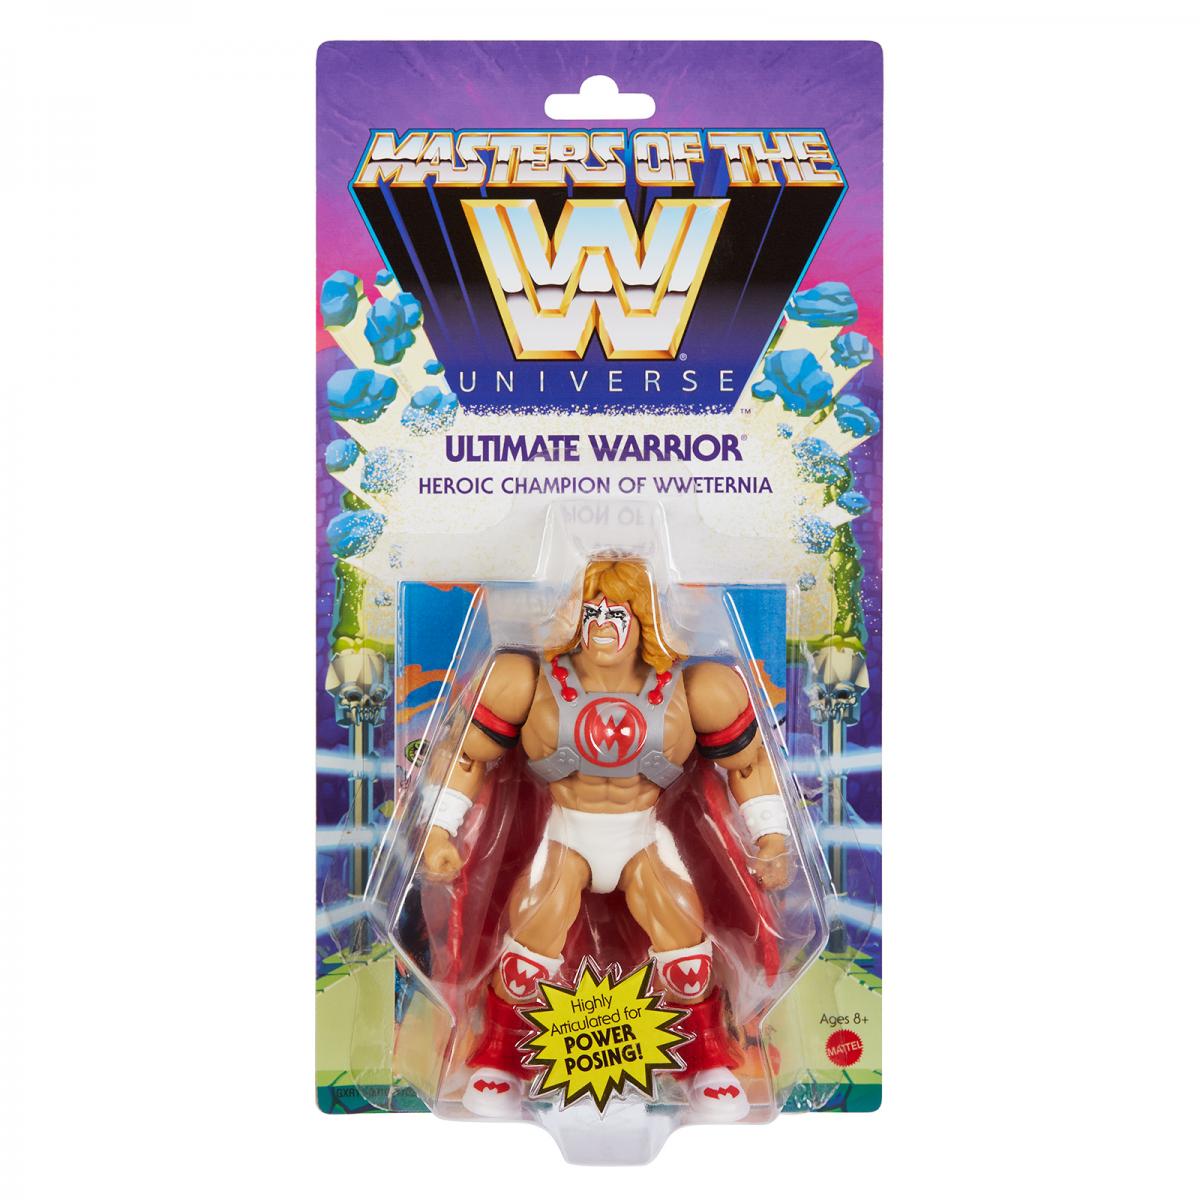 WWE Mattel Masters of the WWE Universe 6 Ultimate Warrior [Exclusive]